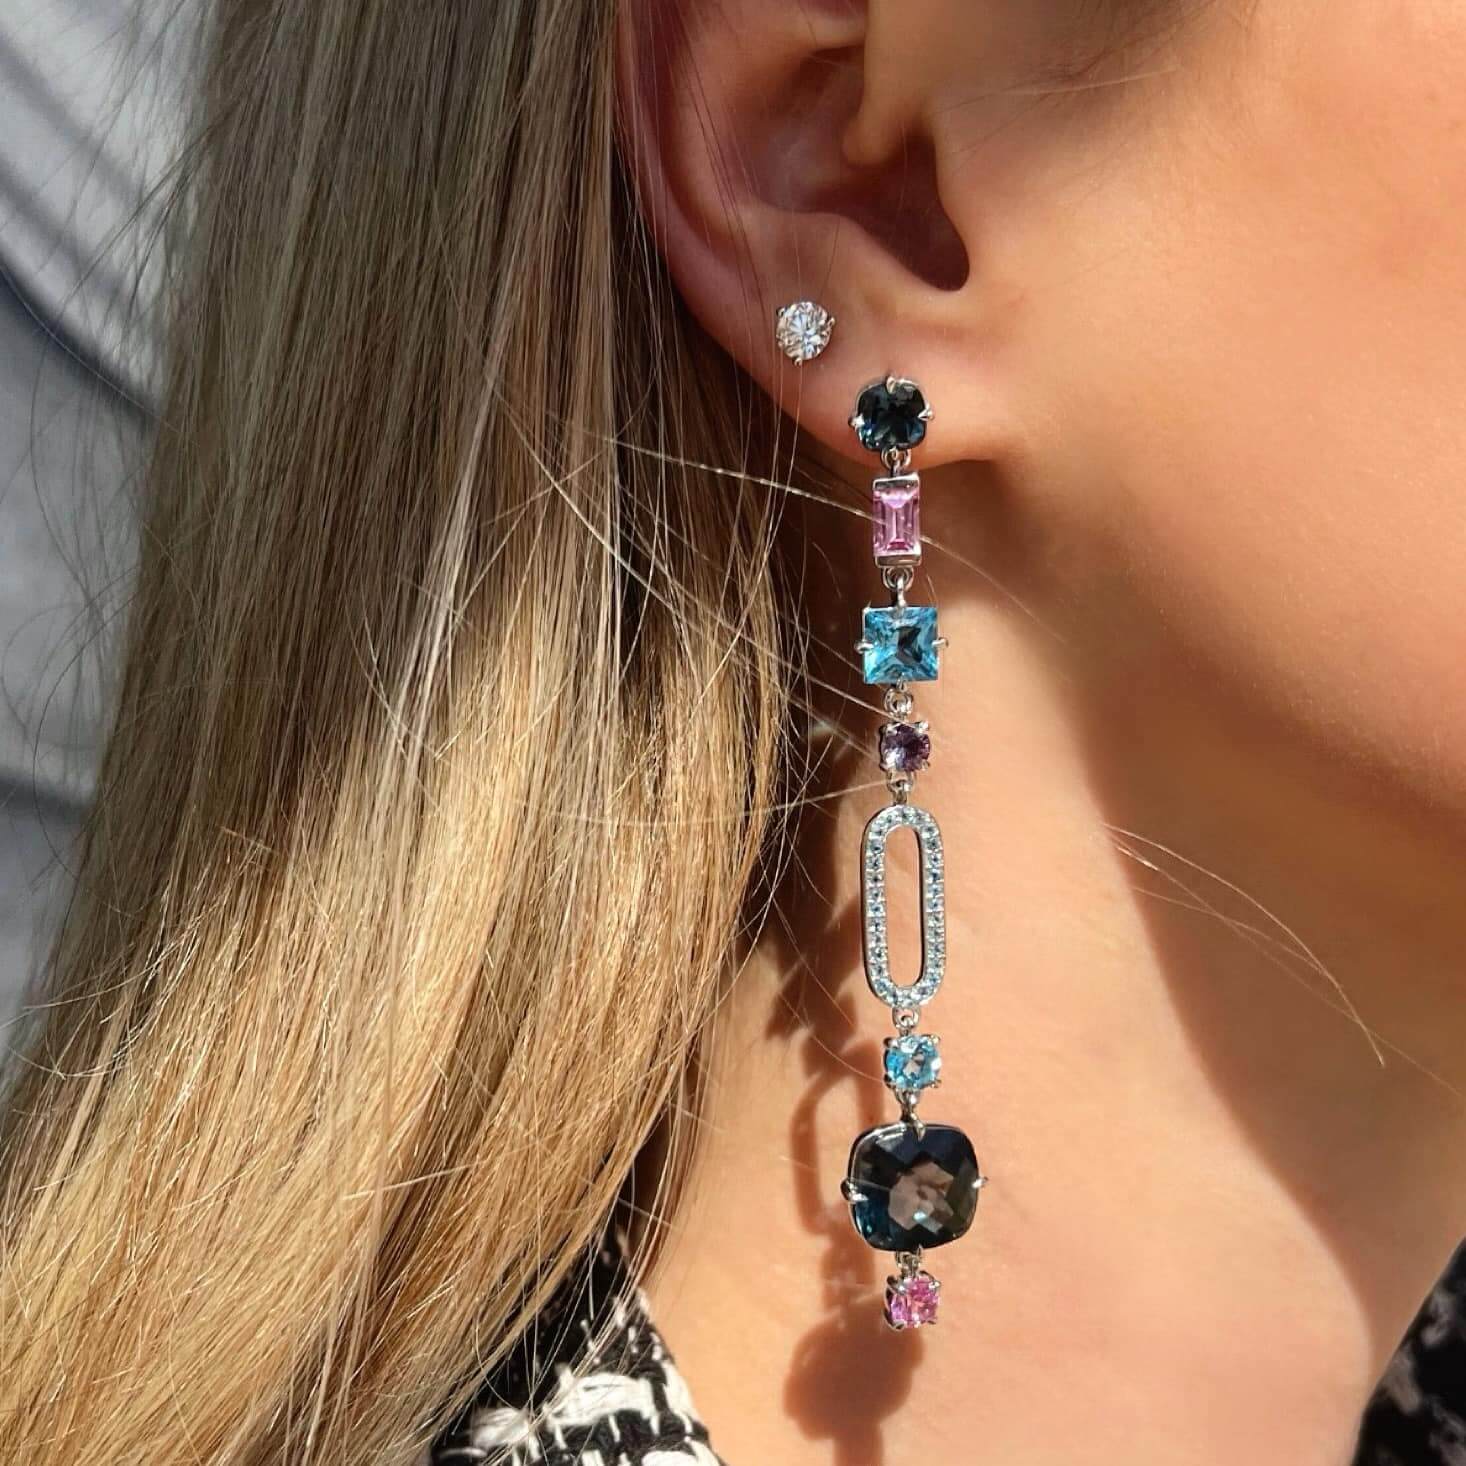 A gemstone earring that's an example of custom jewelry created at Necker's Jewelers.